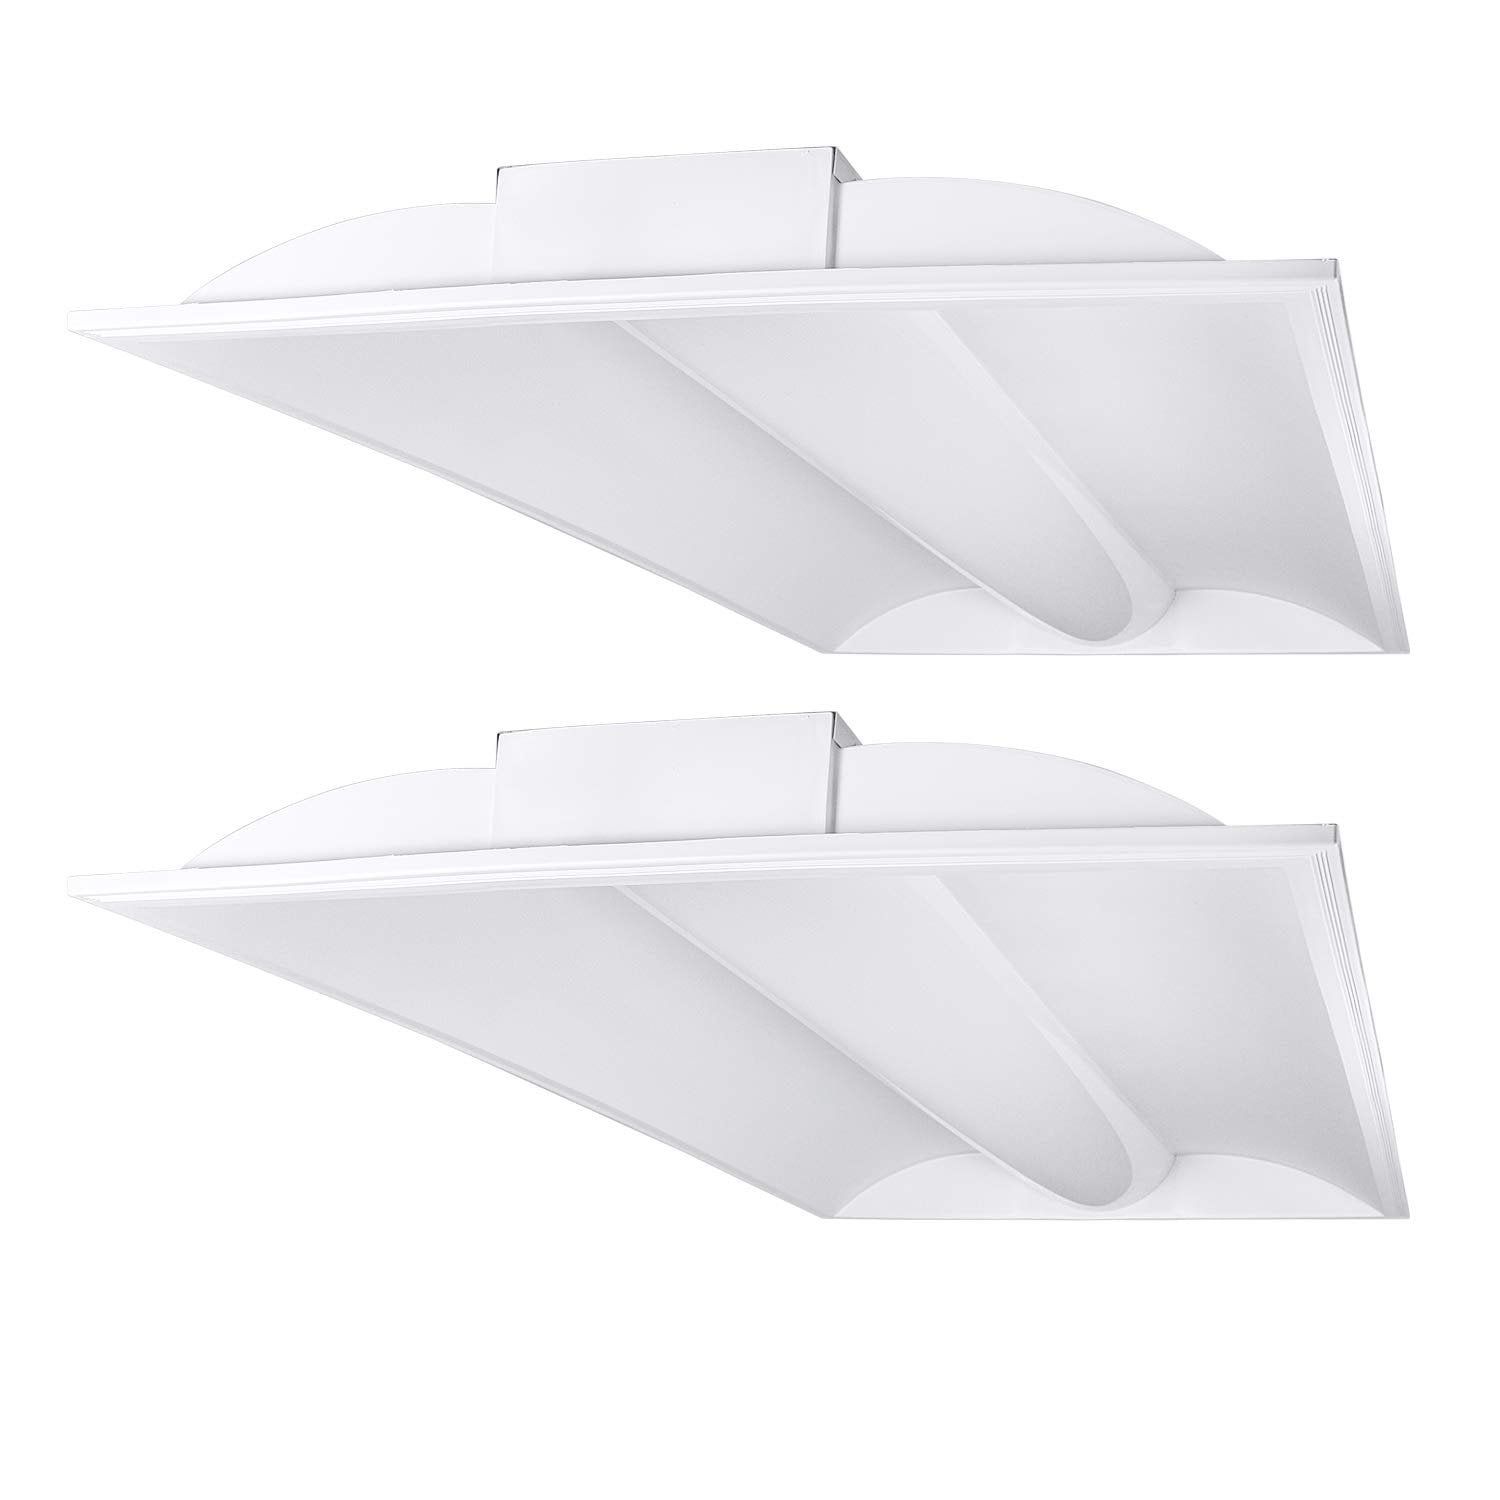 lowes high lumen dimmable 2x4 led panel light